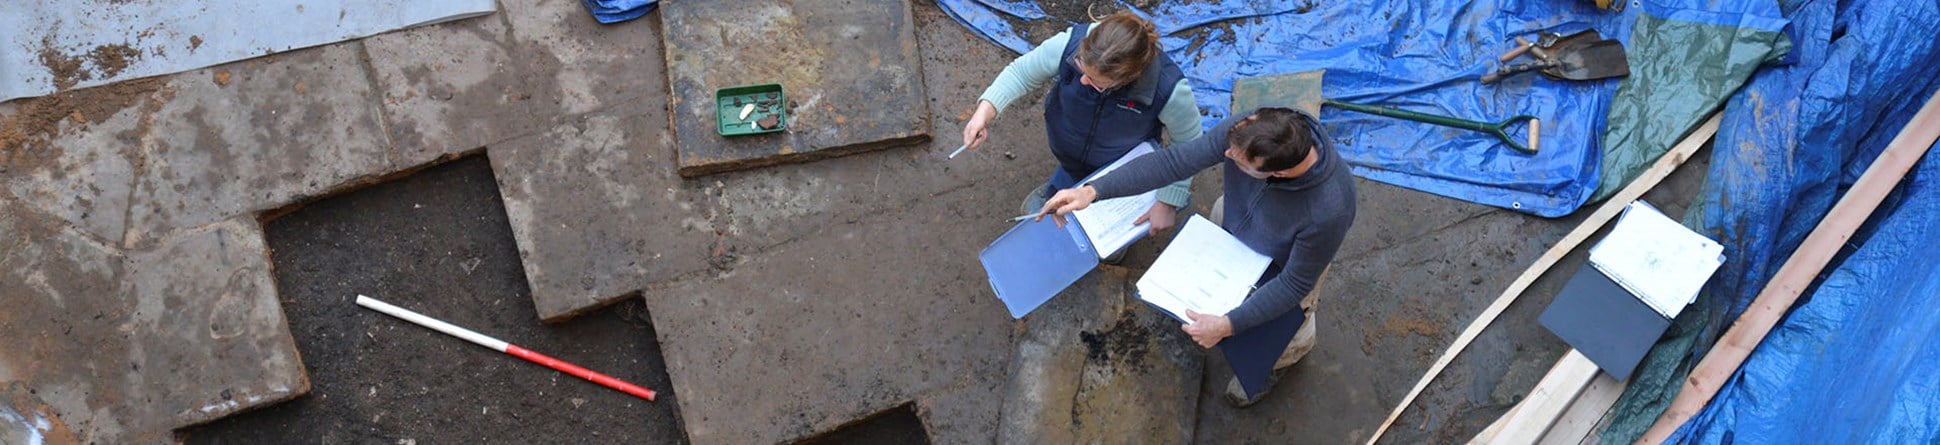 A view looking down into the interior of the tower, showing two archaeologists discussing and recording the trench in front of them.